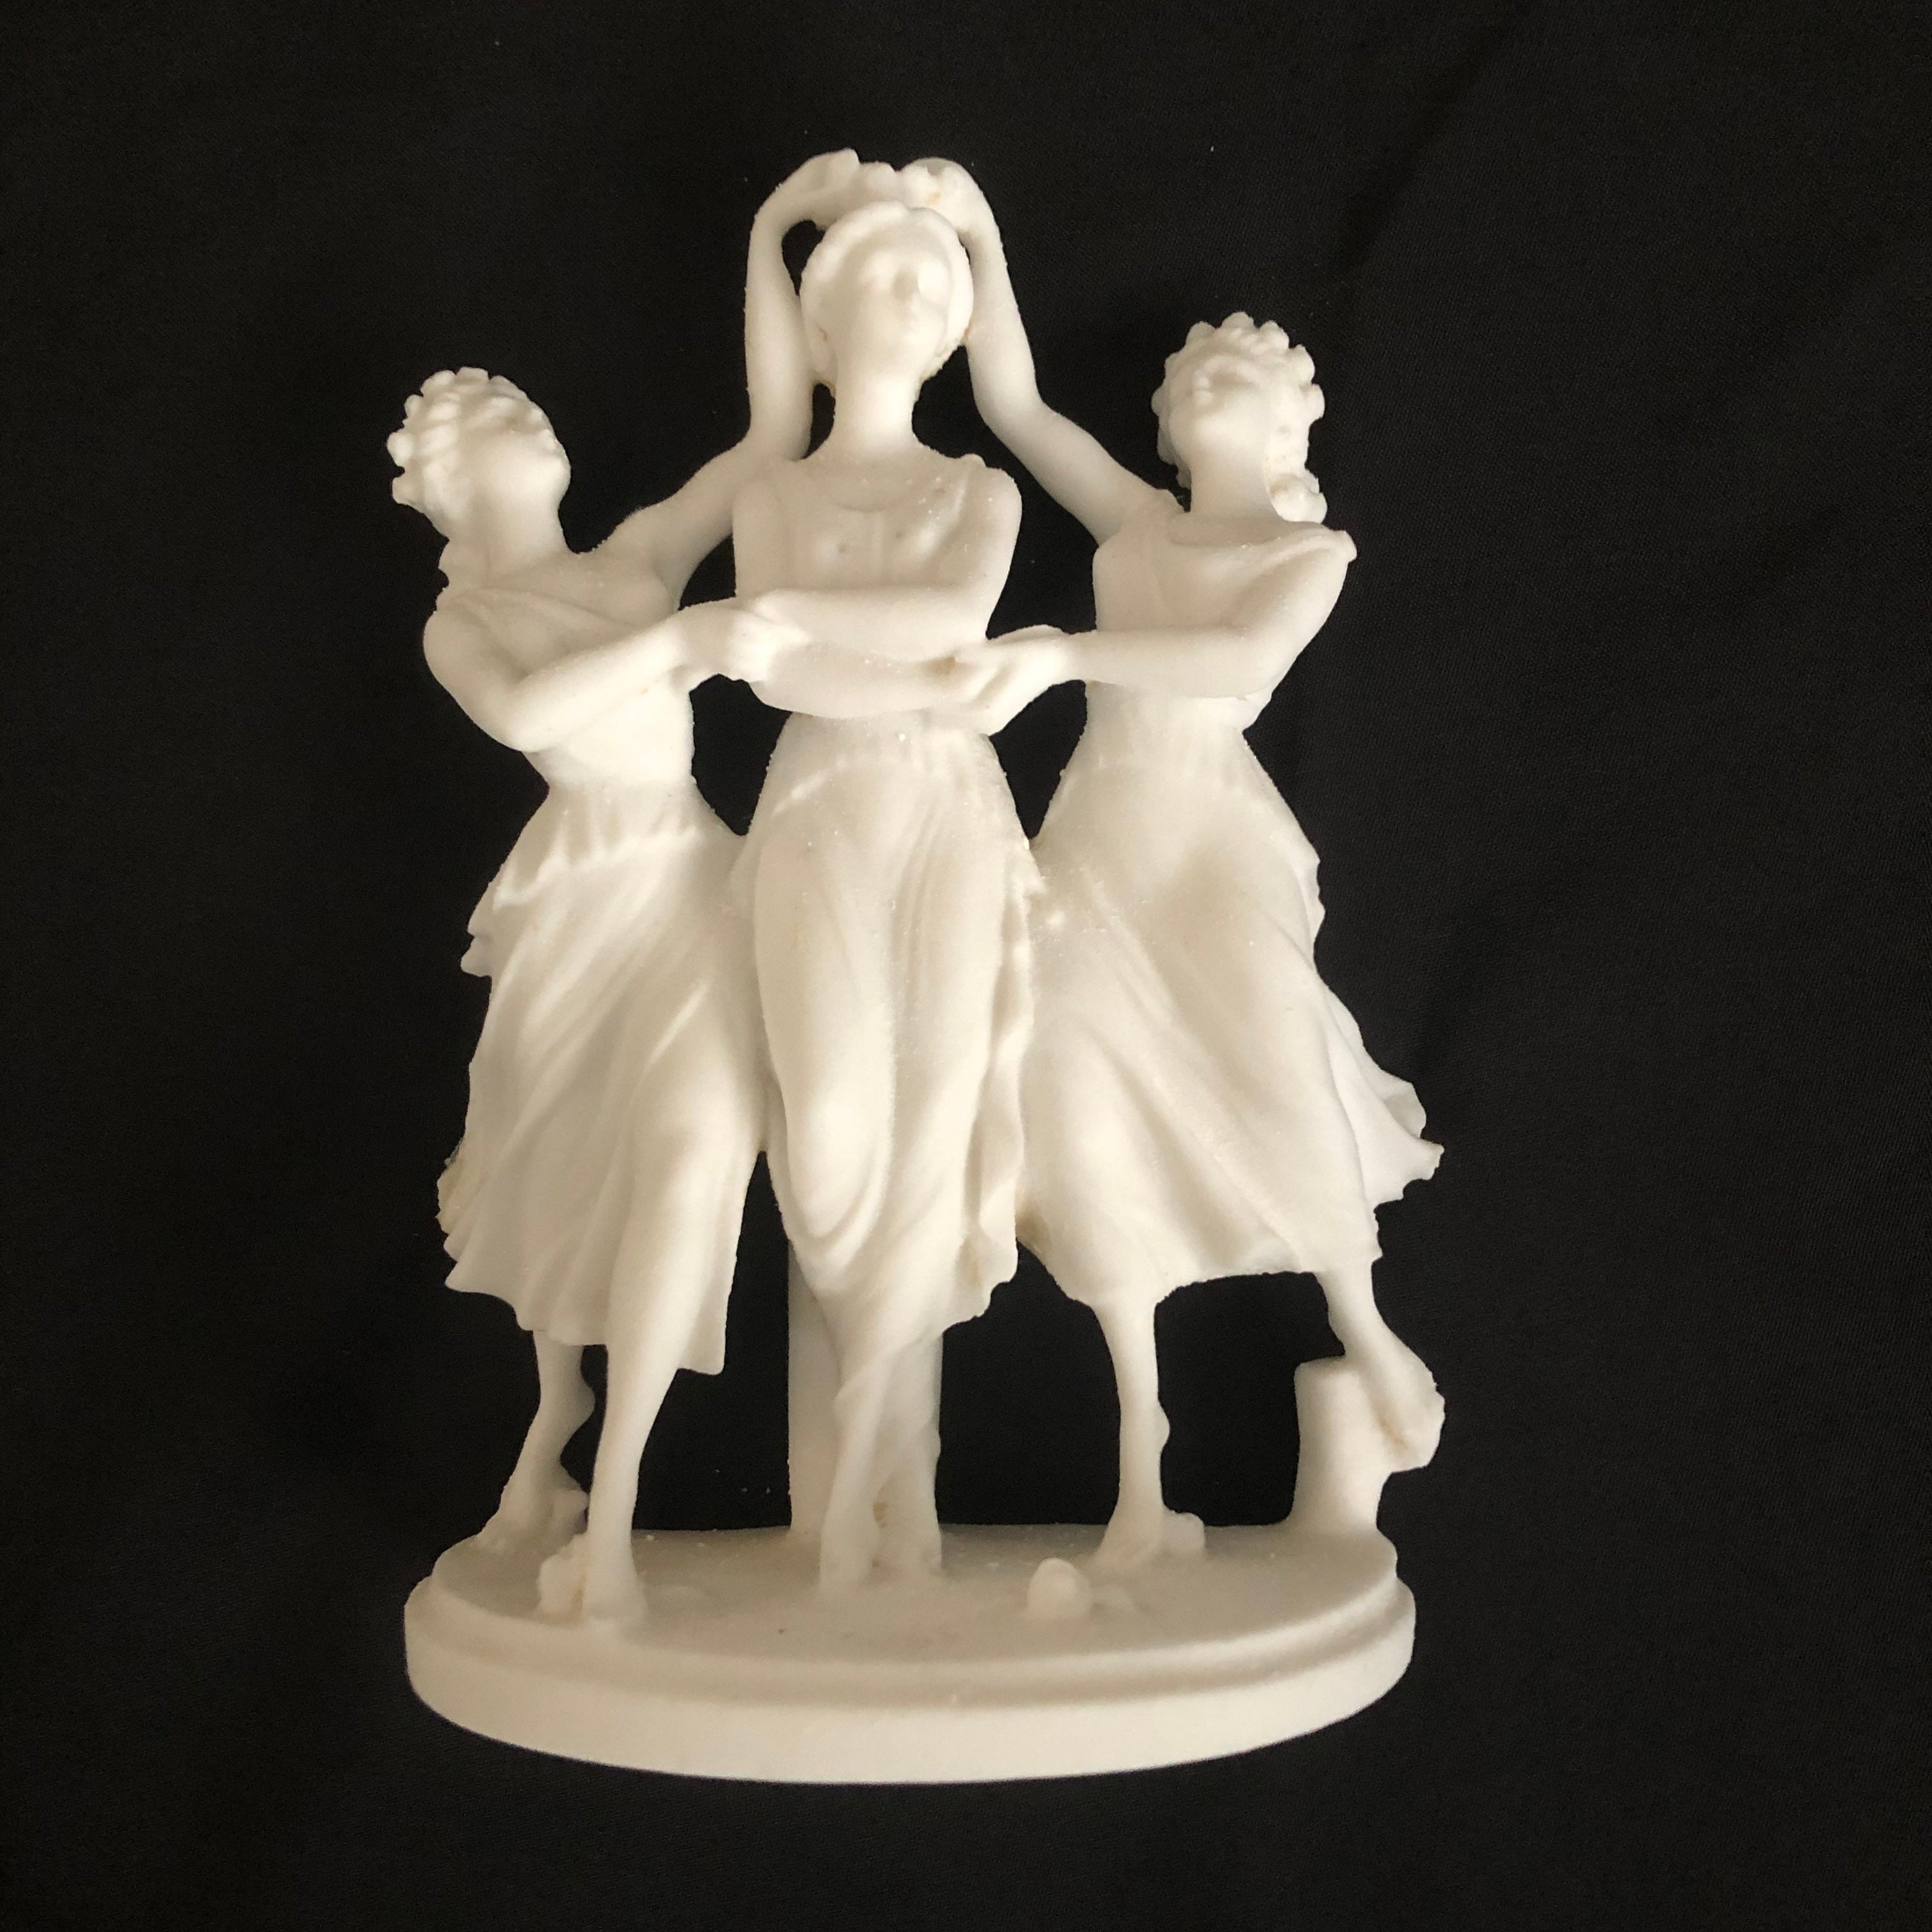 Handmade by G Ruggeri in white alabaster composite Three Graces Statue